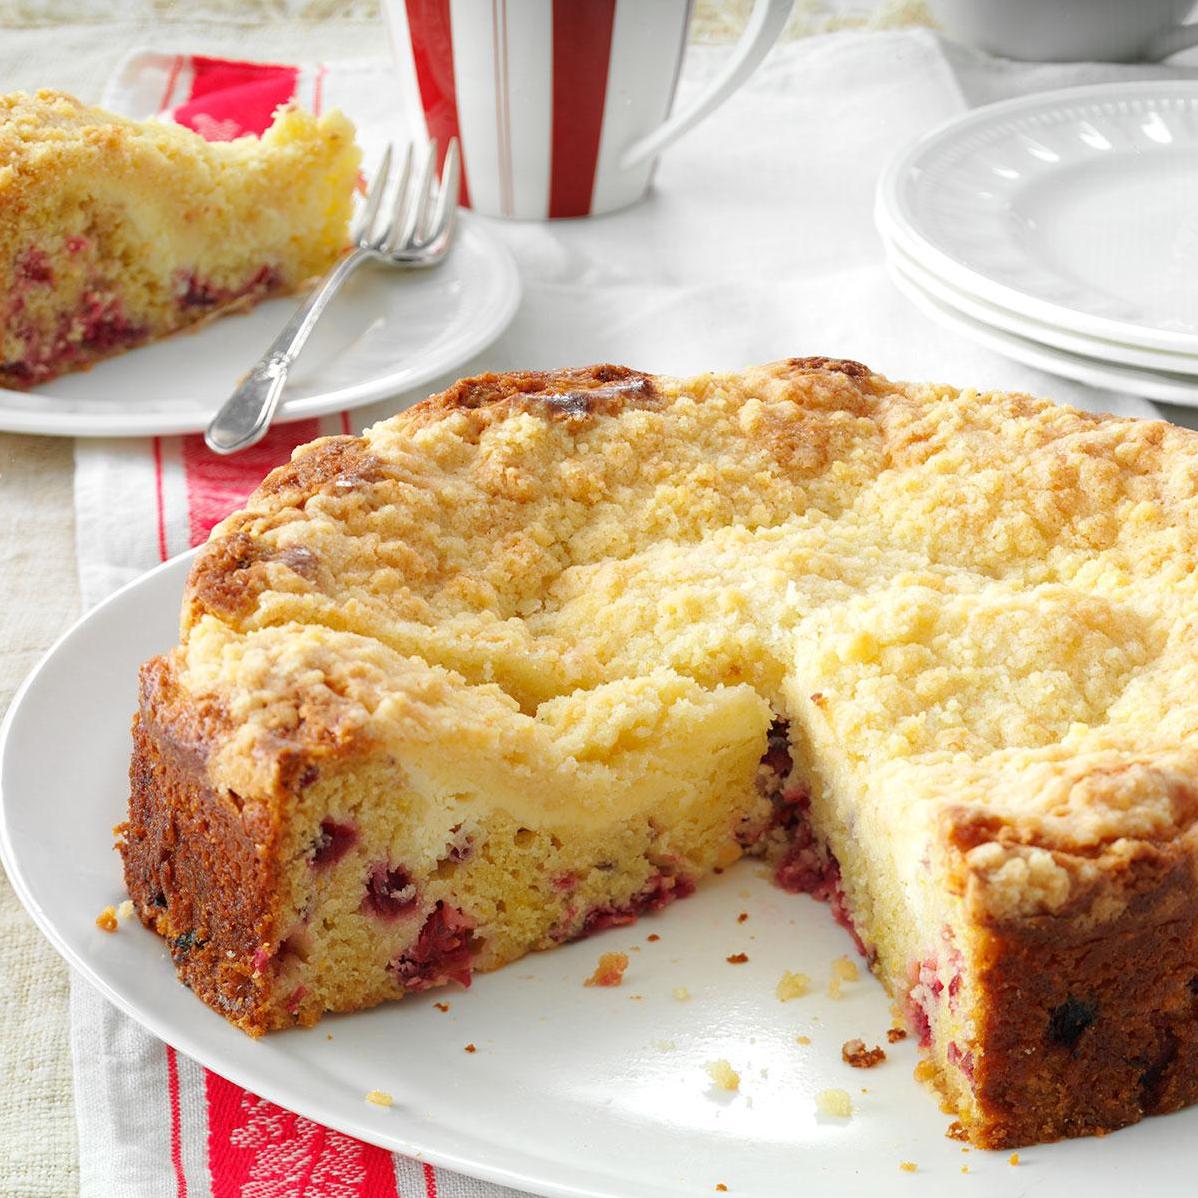  A perfect balance of tart cranberries and creamy cheese in every bite.